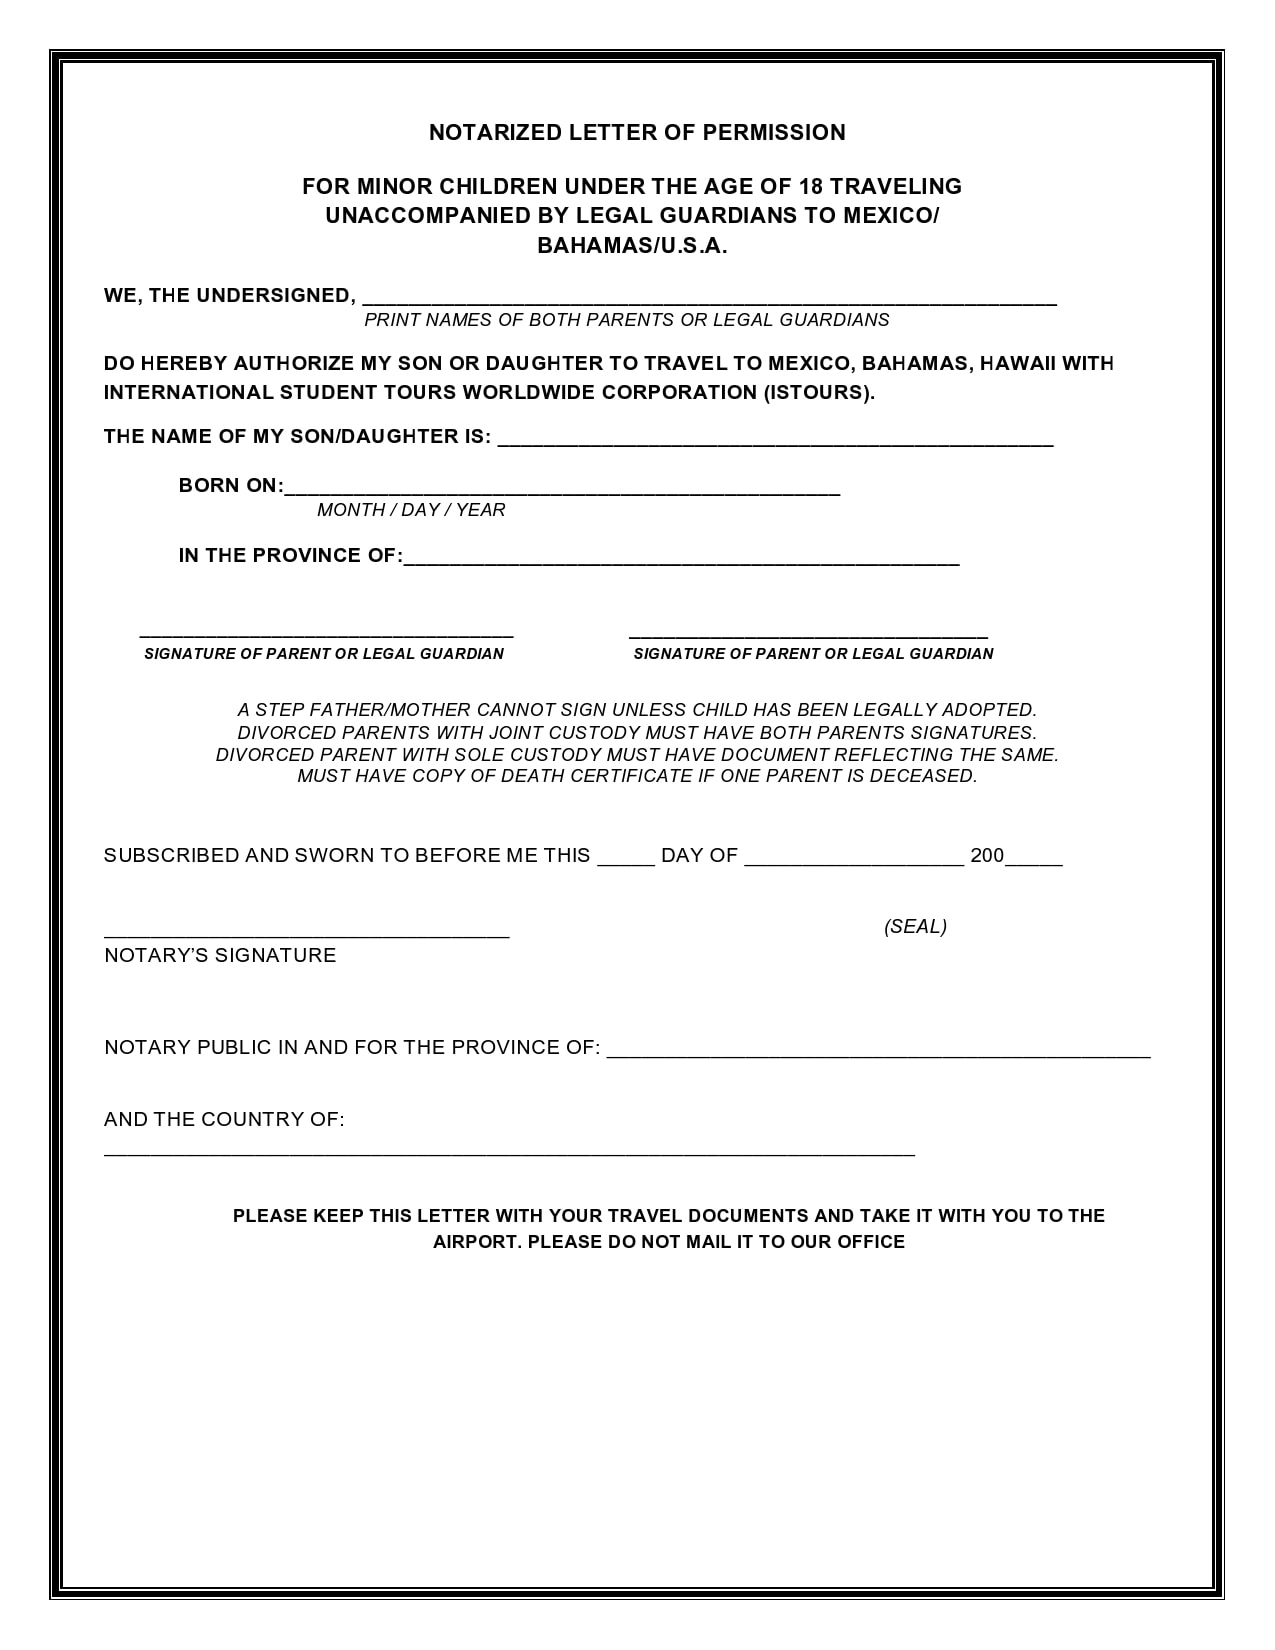 20 Free Notarized Letter Templates Notary Letters - TemplateArchive With Regard To Notarized Letter Template For Child Travel